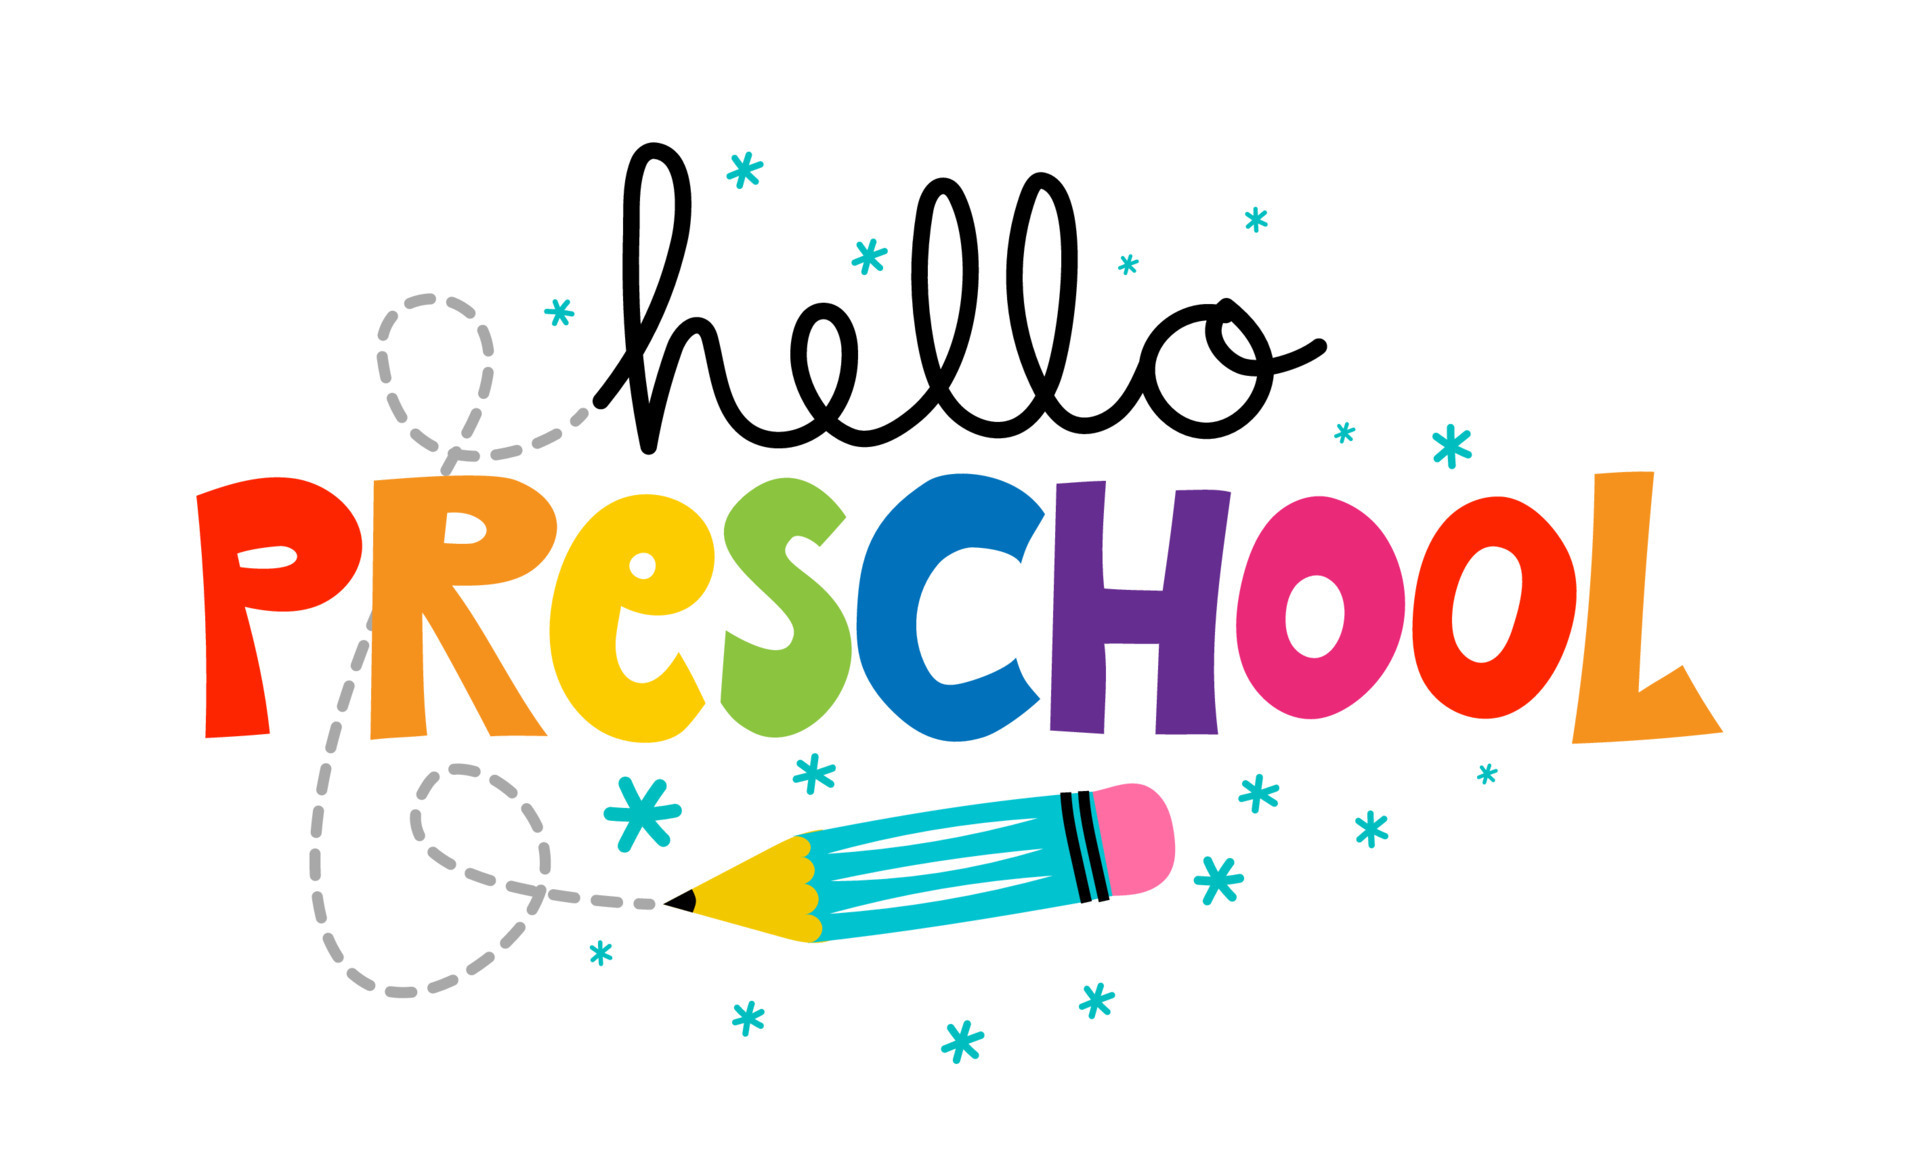 Hello Preschool with childish colorful pencil - typography ...